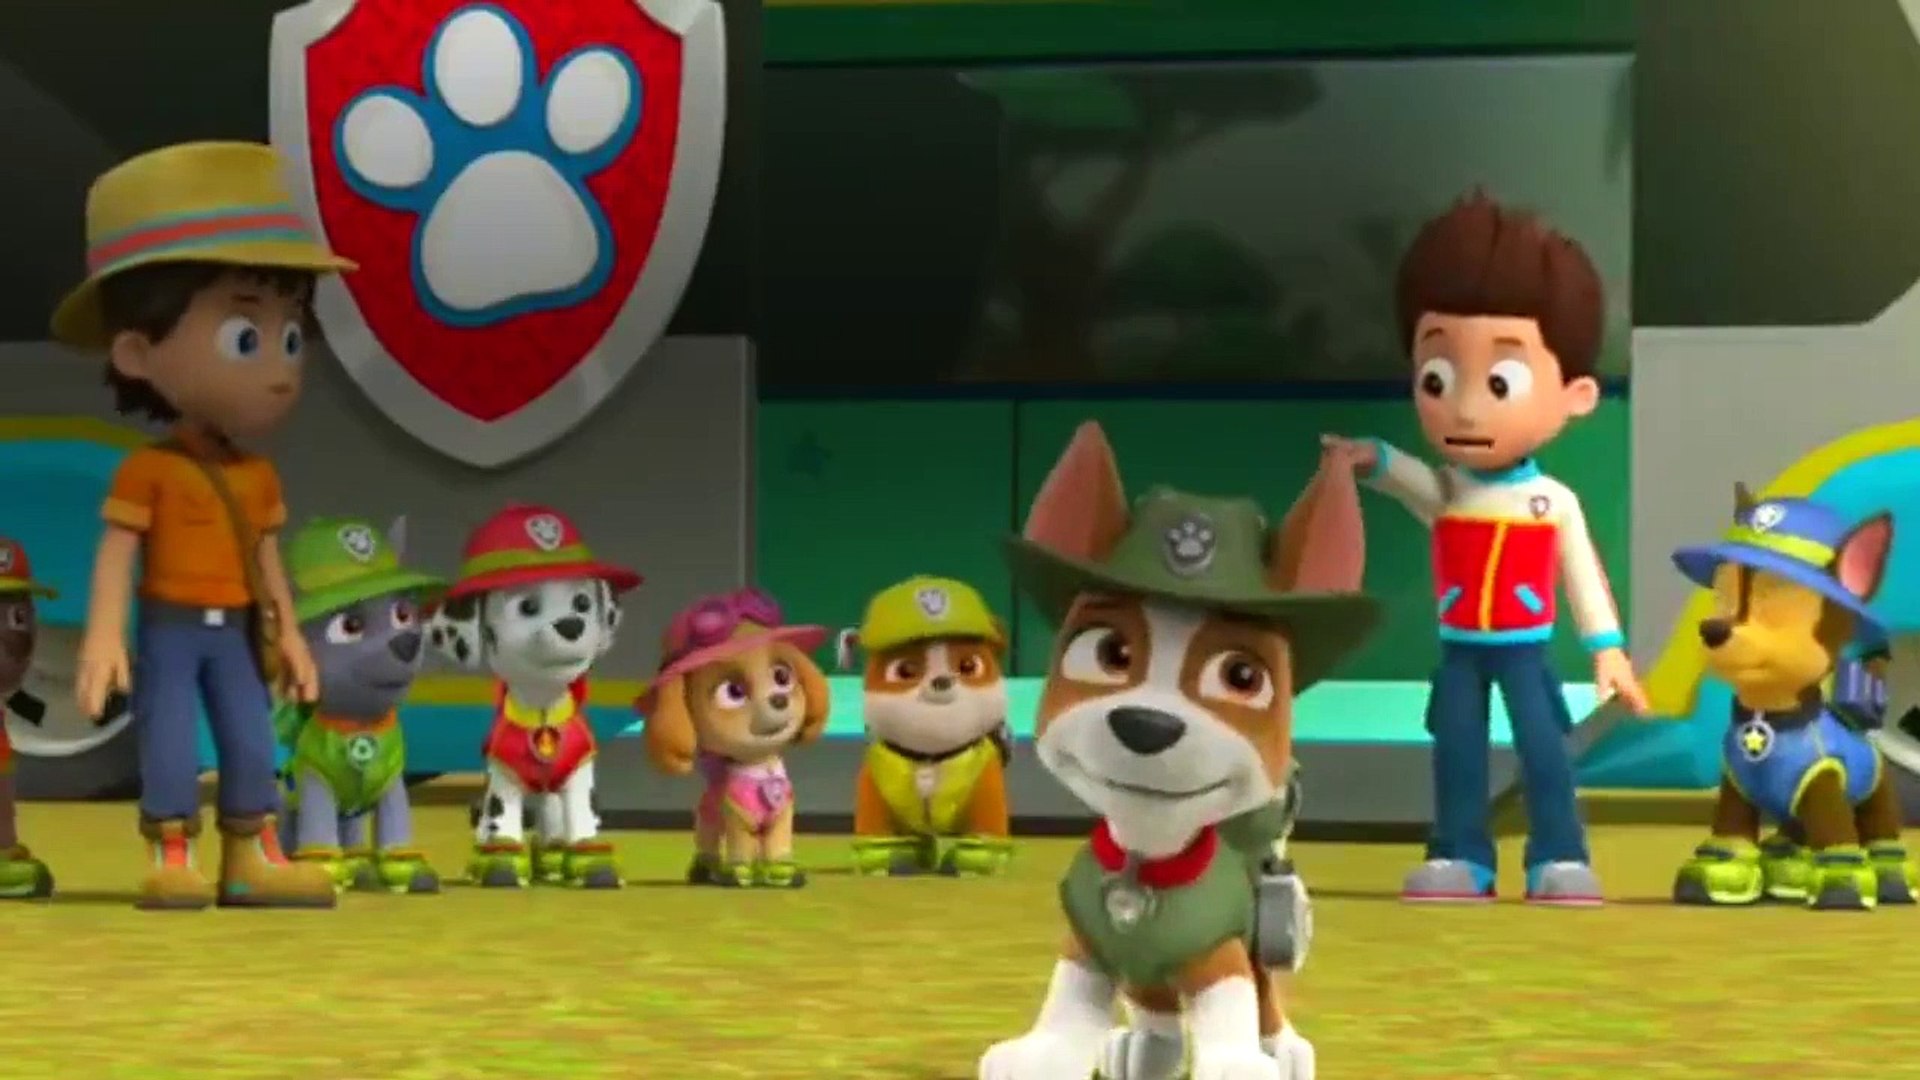 Paw Patrol - S 03 E 15 - Tracker Joins the Pups! - Dailymotion Video